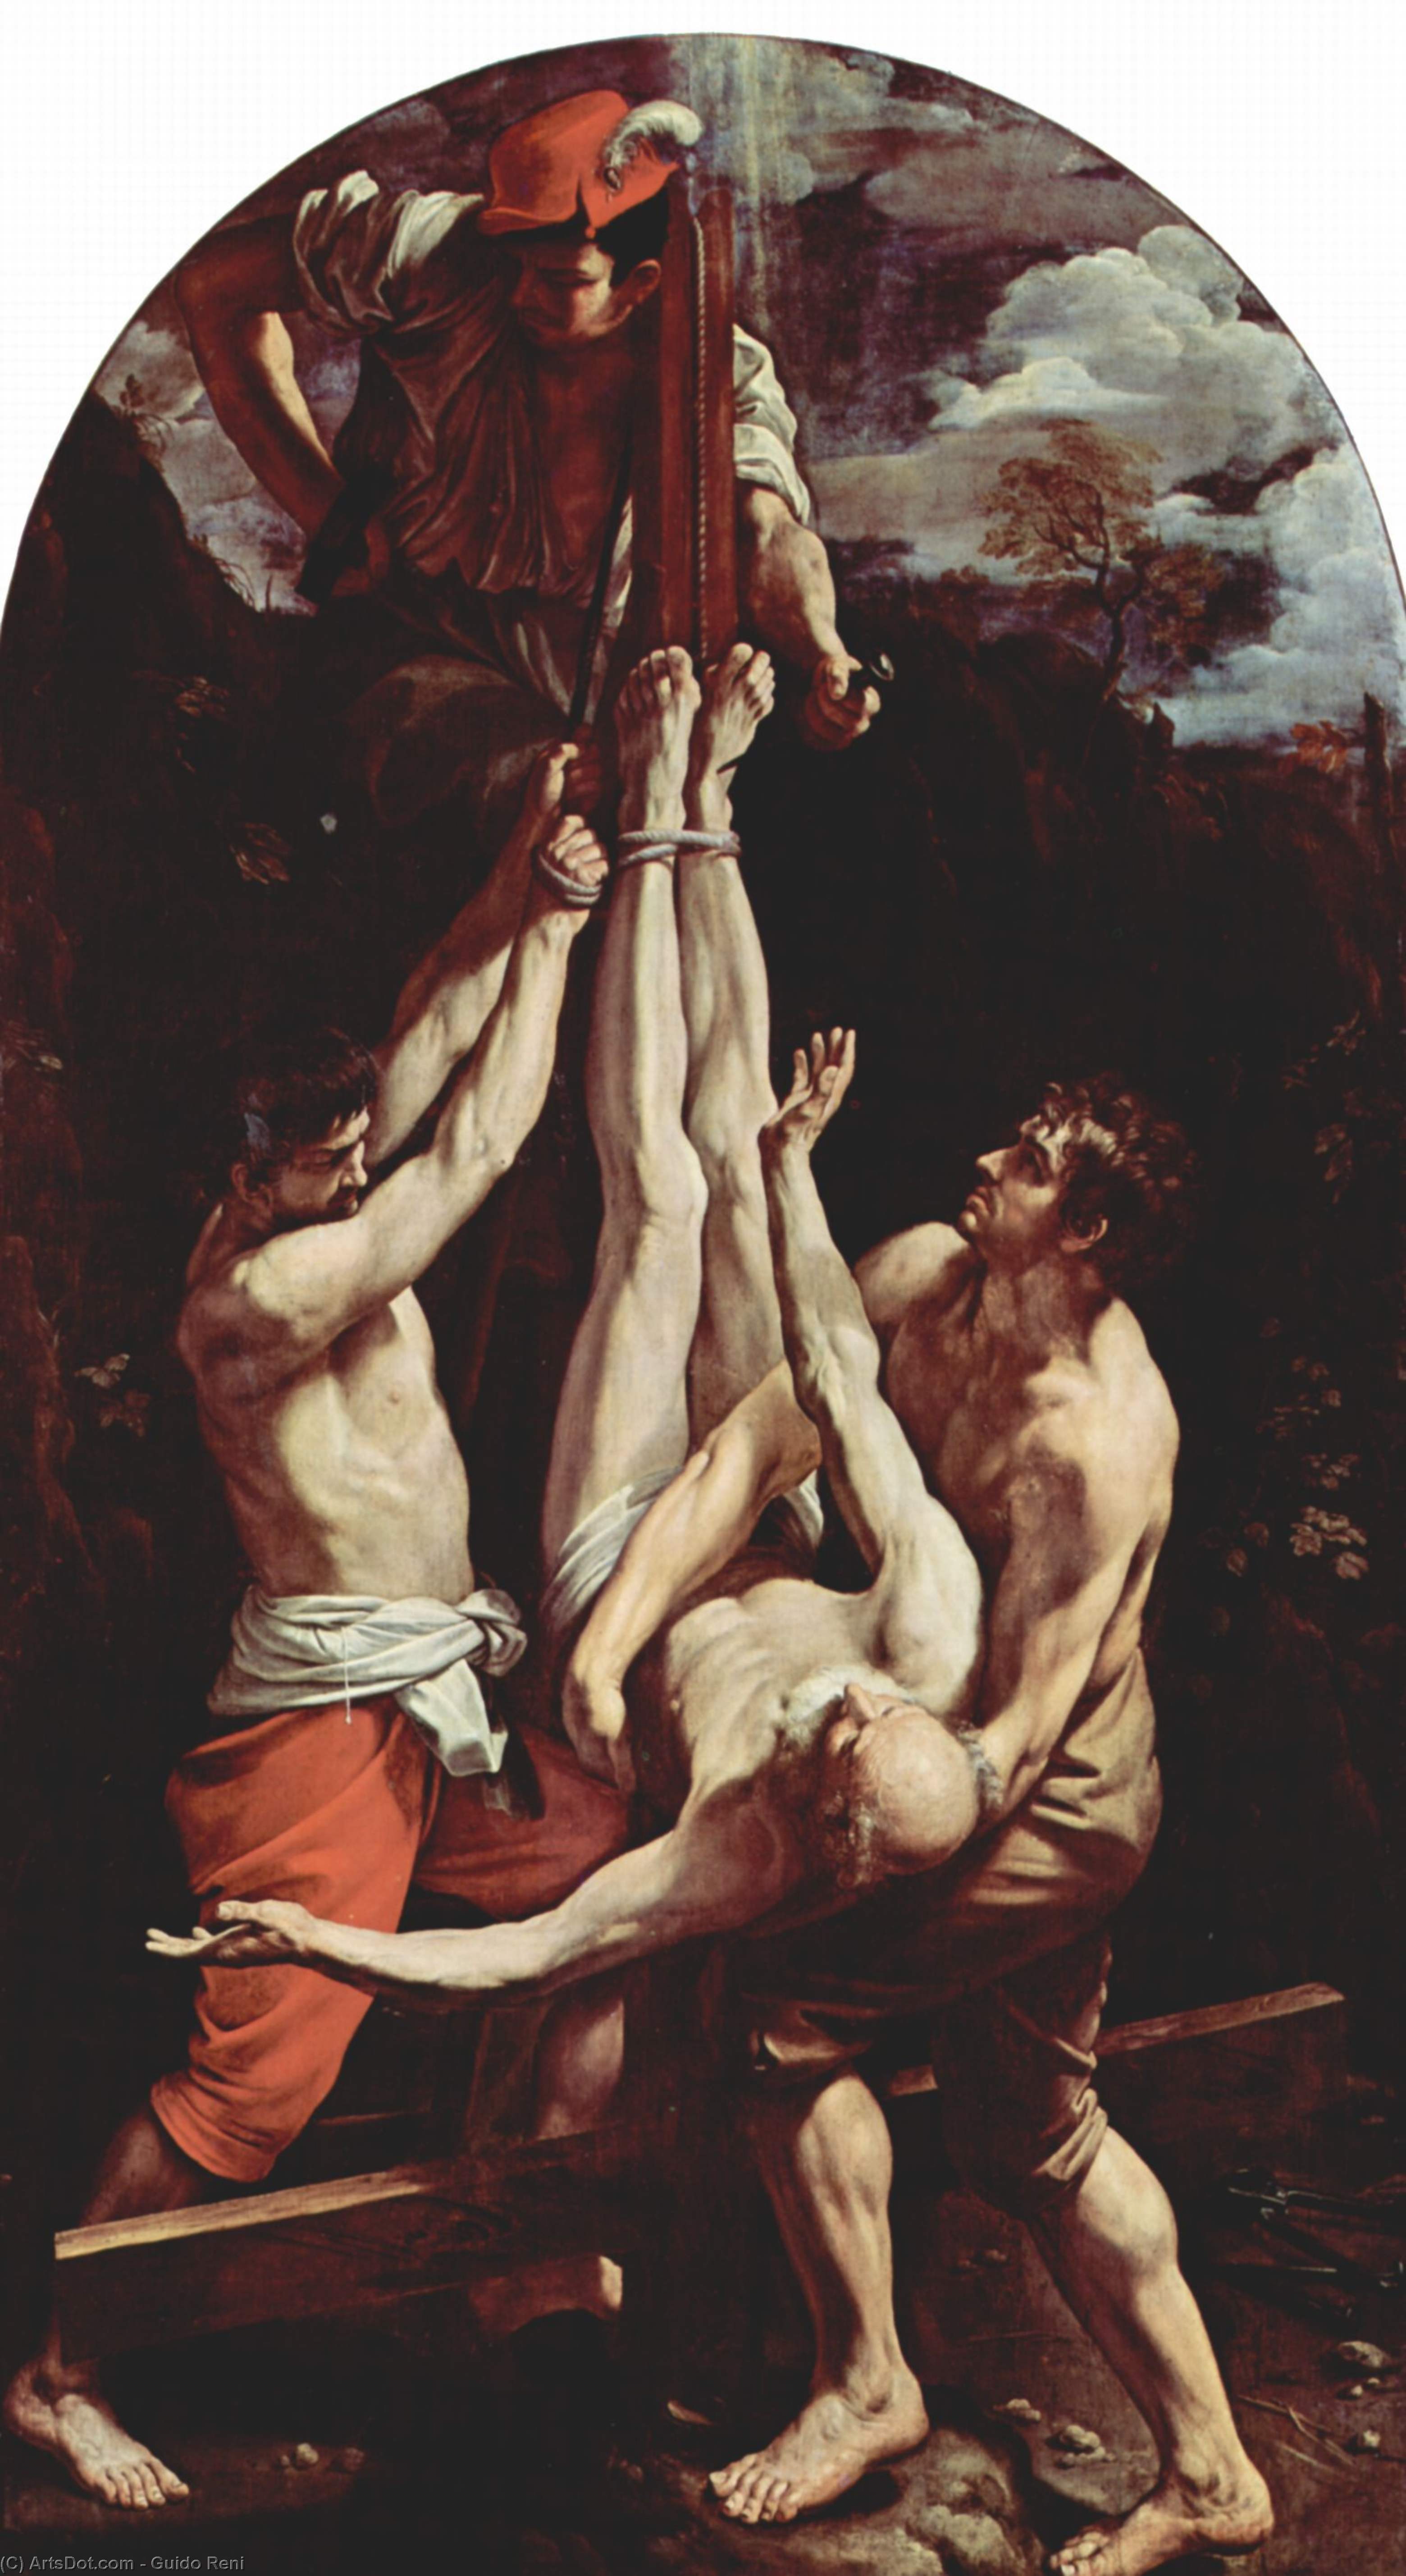 Buy Museum Art Reproductions Crucifixion of St. Peter, 1605 by Reni Guido (Le Guide) (1575-1642, Italy) | ArtsDot.com